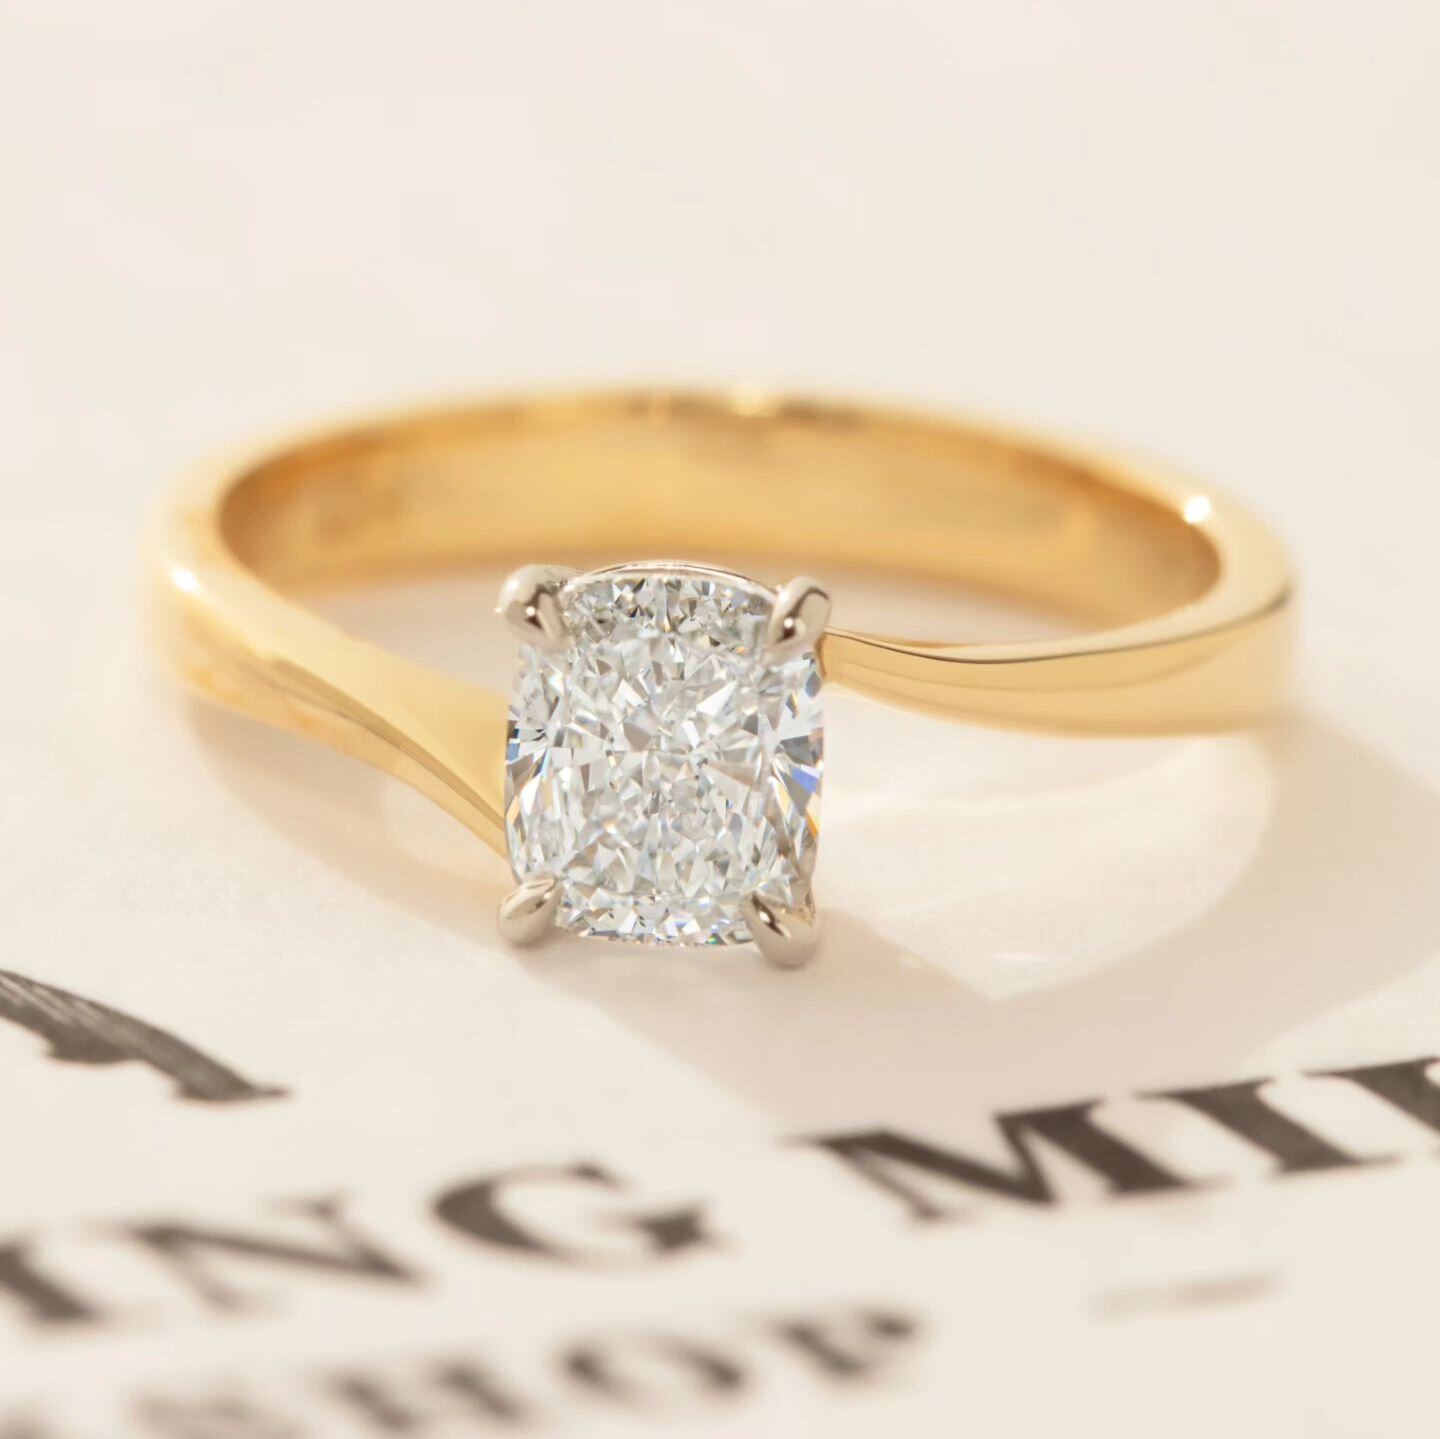 Flowing gold leads up to a magnificent cushion-cut diamond, set in Platinum. This one is an absolute sparkler! Created for our fabulous customers Callum and Sophie who have recently featured in @nzbrideandgroom ✨️